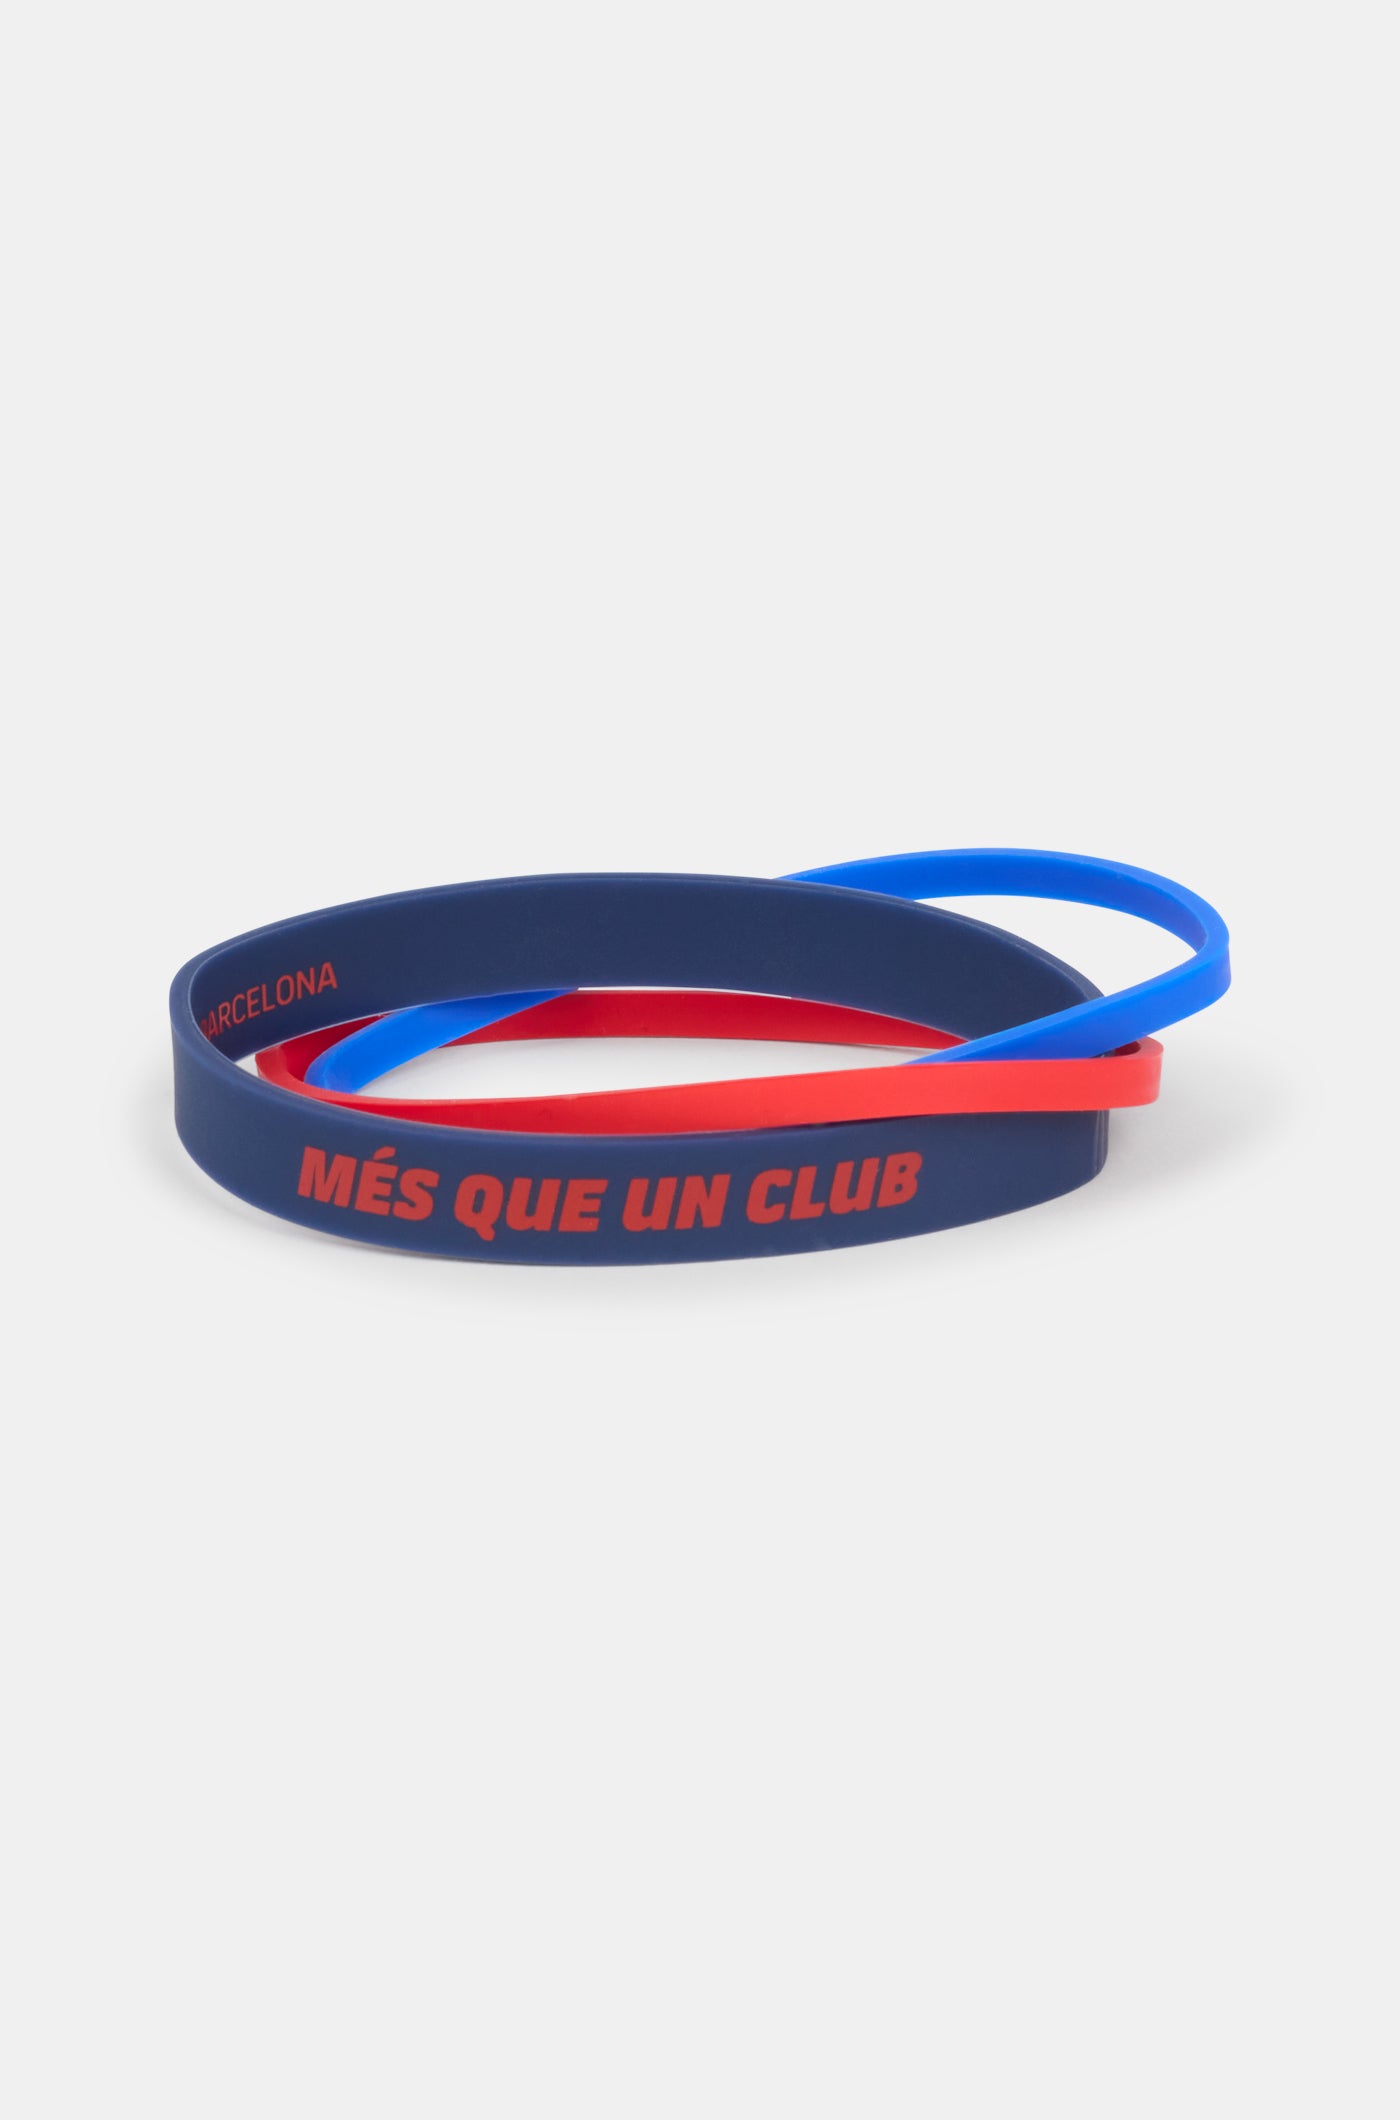 Buy China Wholesale Silicone Bracelets Cool Mixed Color Sports Basketball  Star Wristbands For Fans Gifts & Silicone Bracelets $0.17 |  Globalsources.com